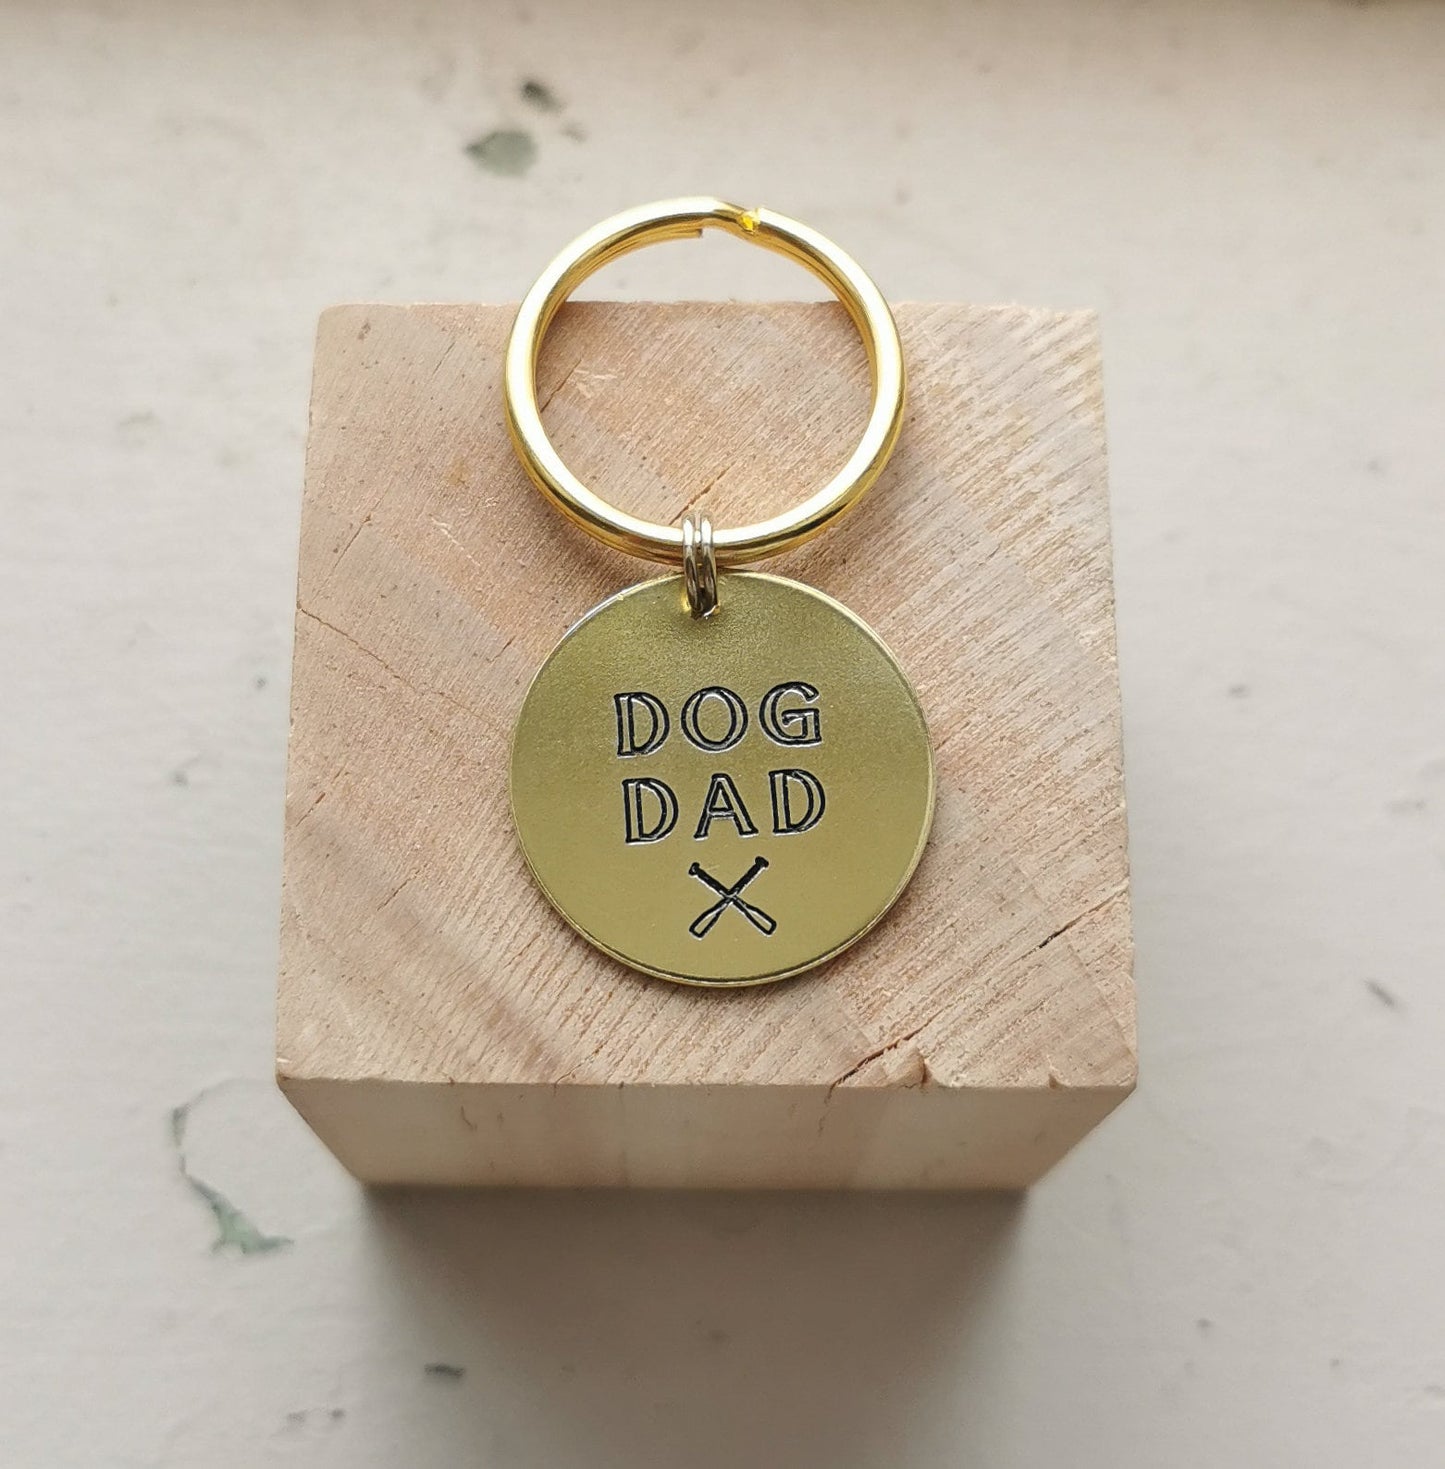 Products Dog Dad Oars Keychain - Engraved - Dog Dad Gift - Gift for Him- Gift for Husband - Gift for Couples - Unique Gift - Birthday Gift - Christmas Gift for Him - Christmas Gift - Dog Christmas - Handmade - Metal Working